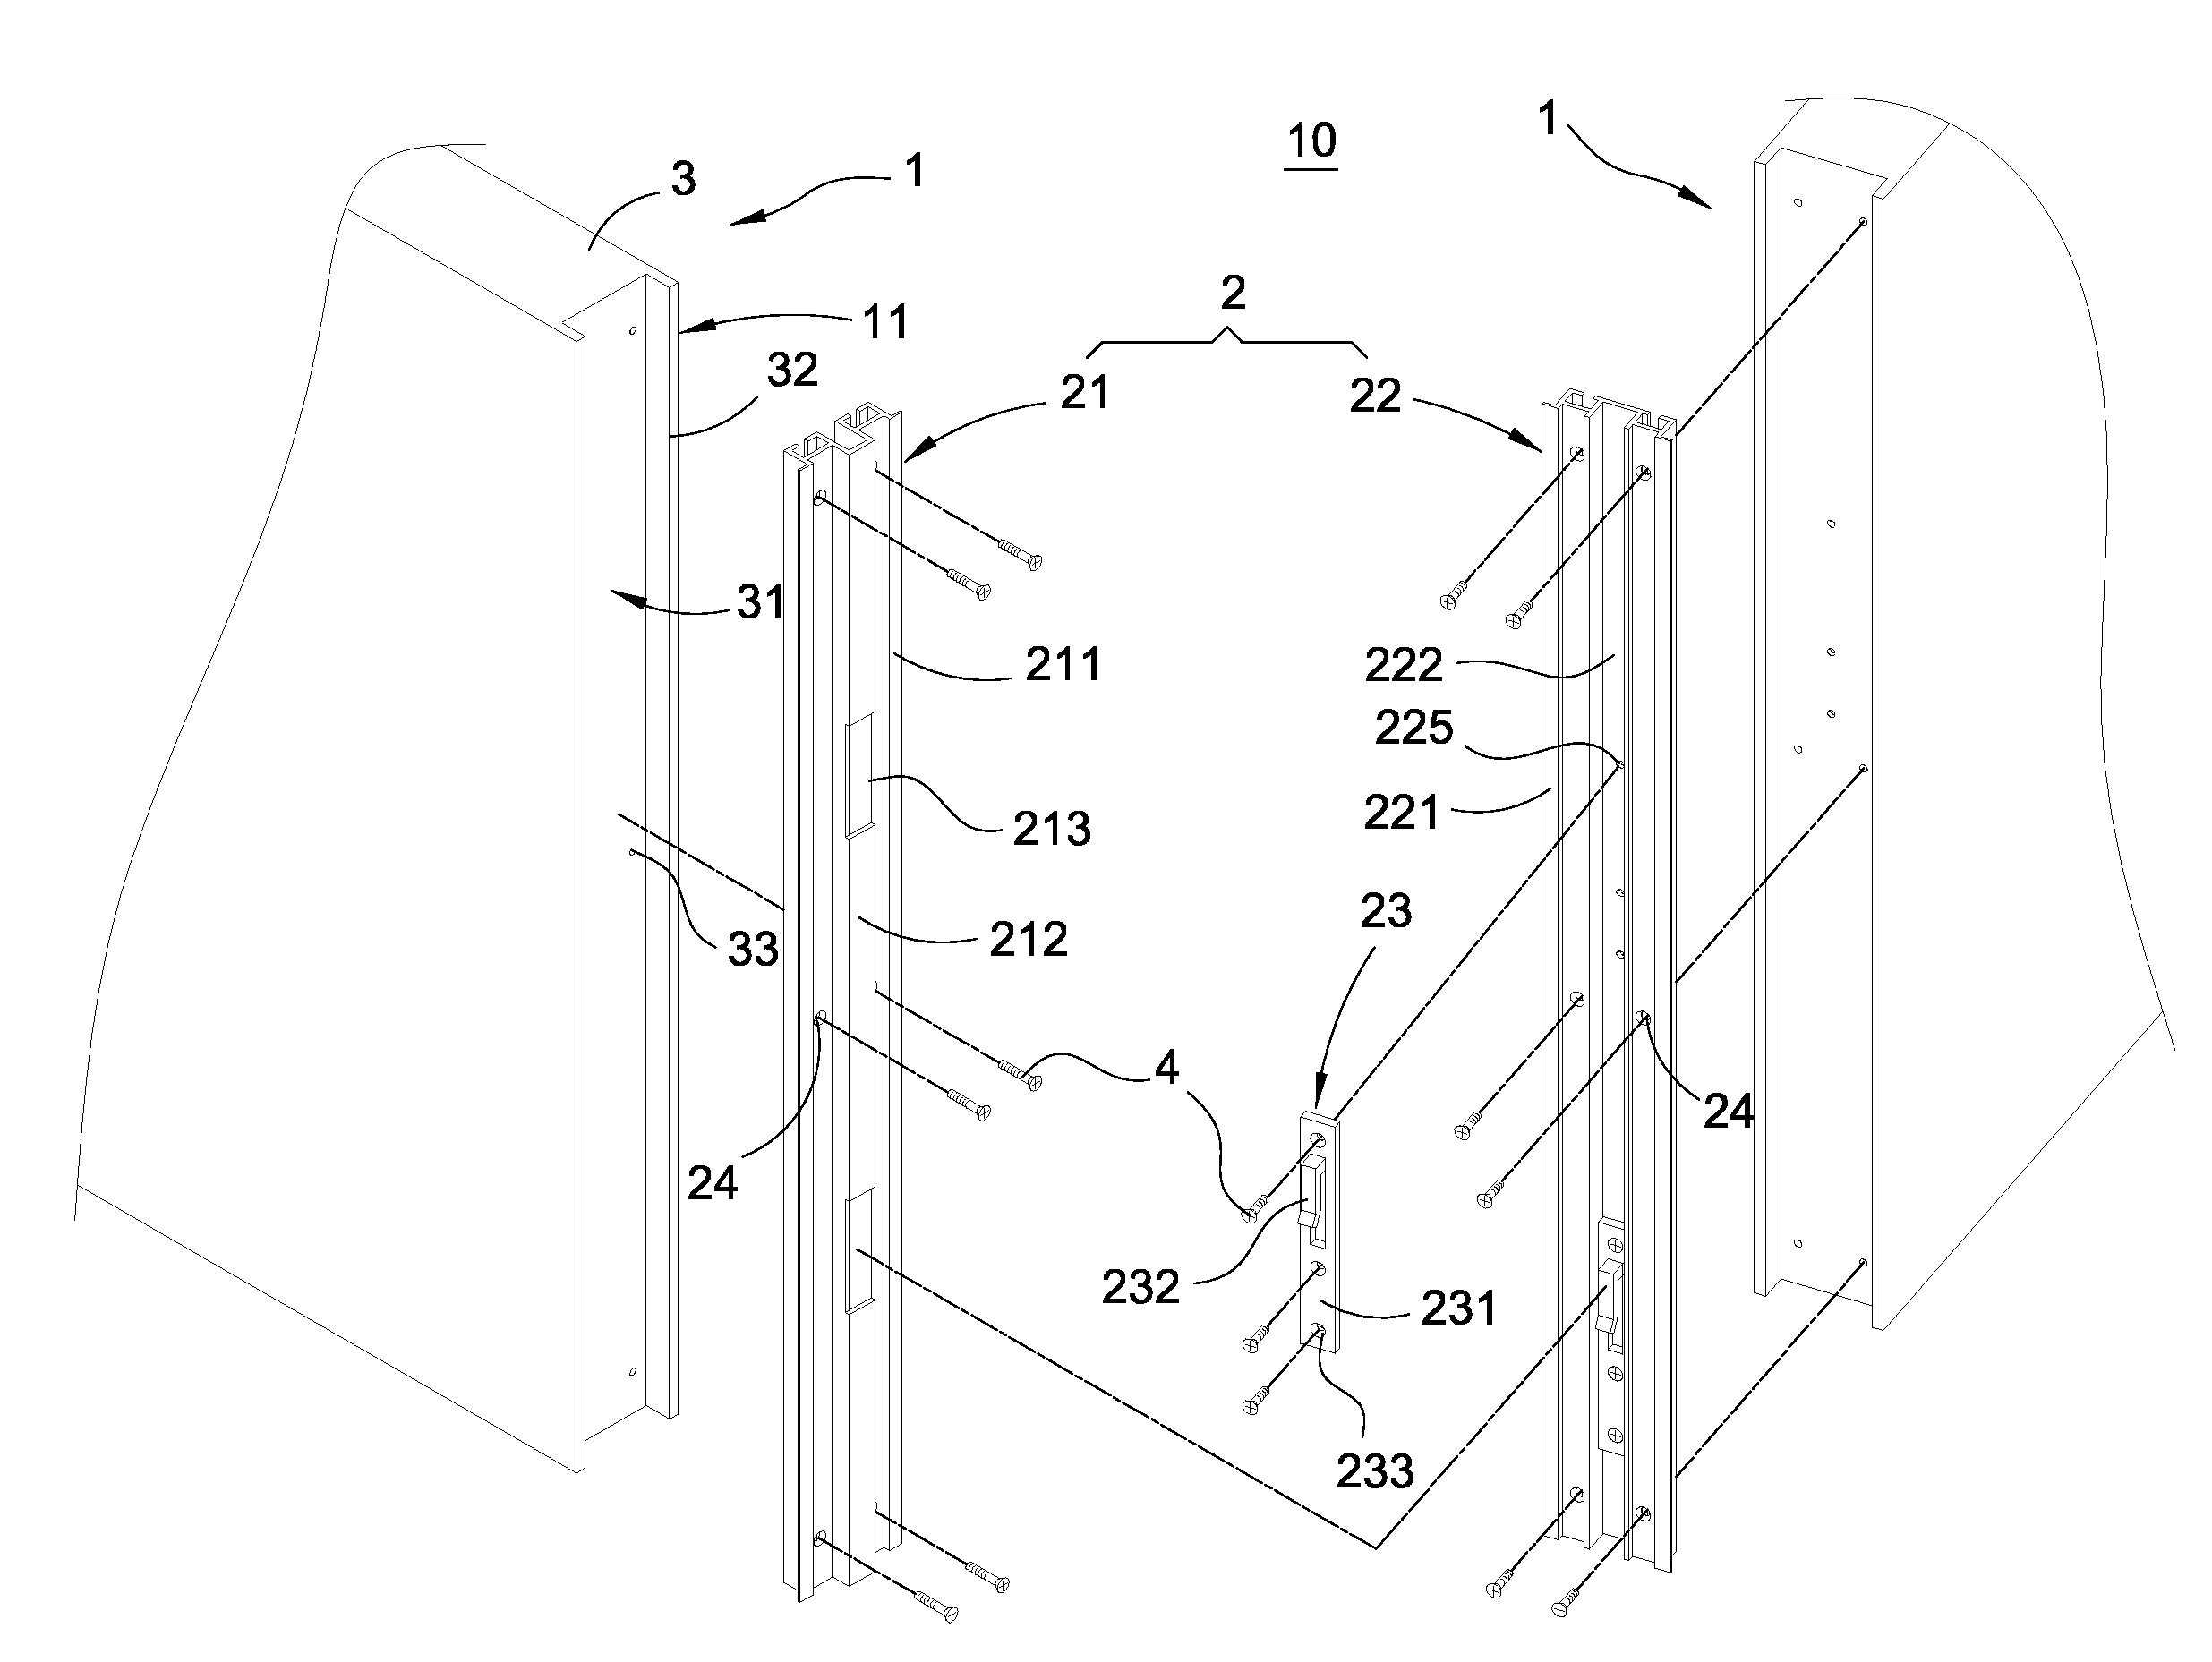 Partition structure having engaging assembly